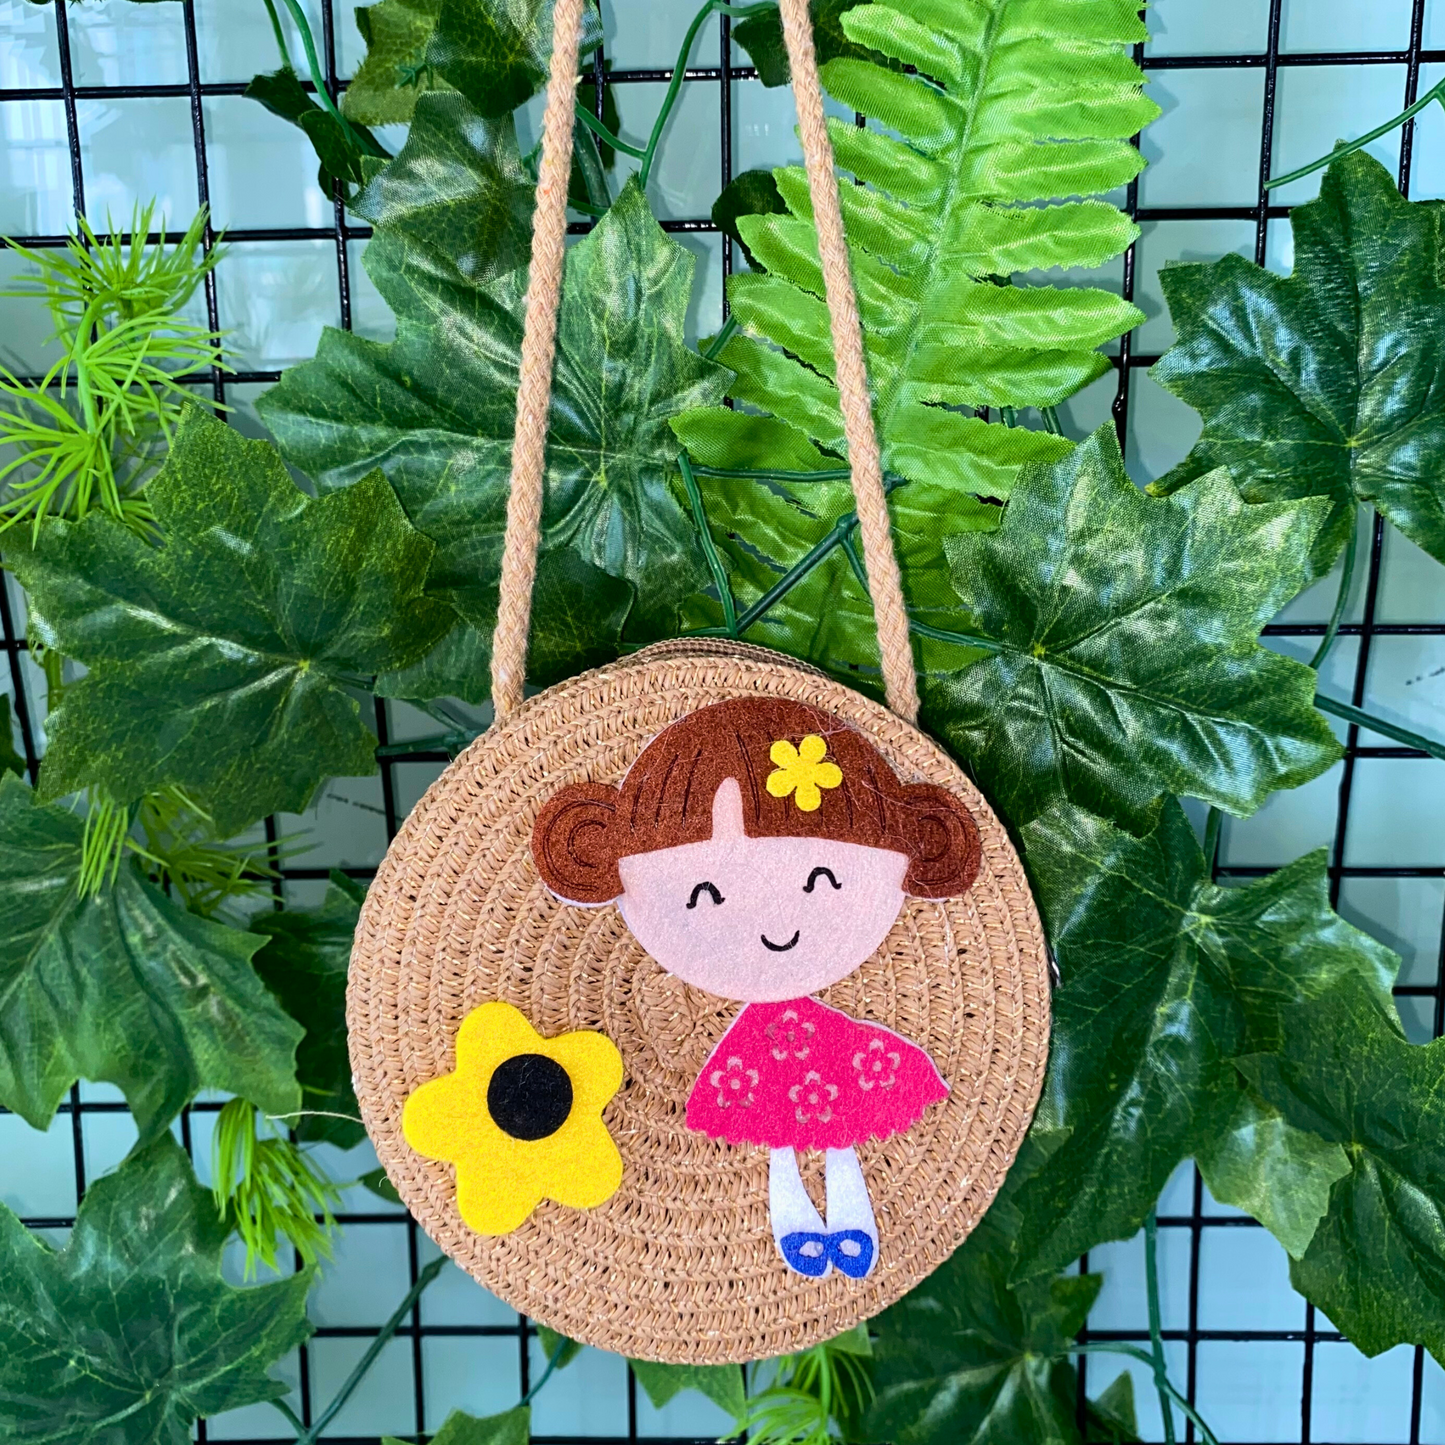 Mini Straw Bag Perfect for Vacations